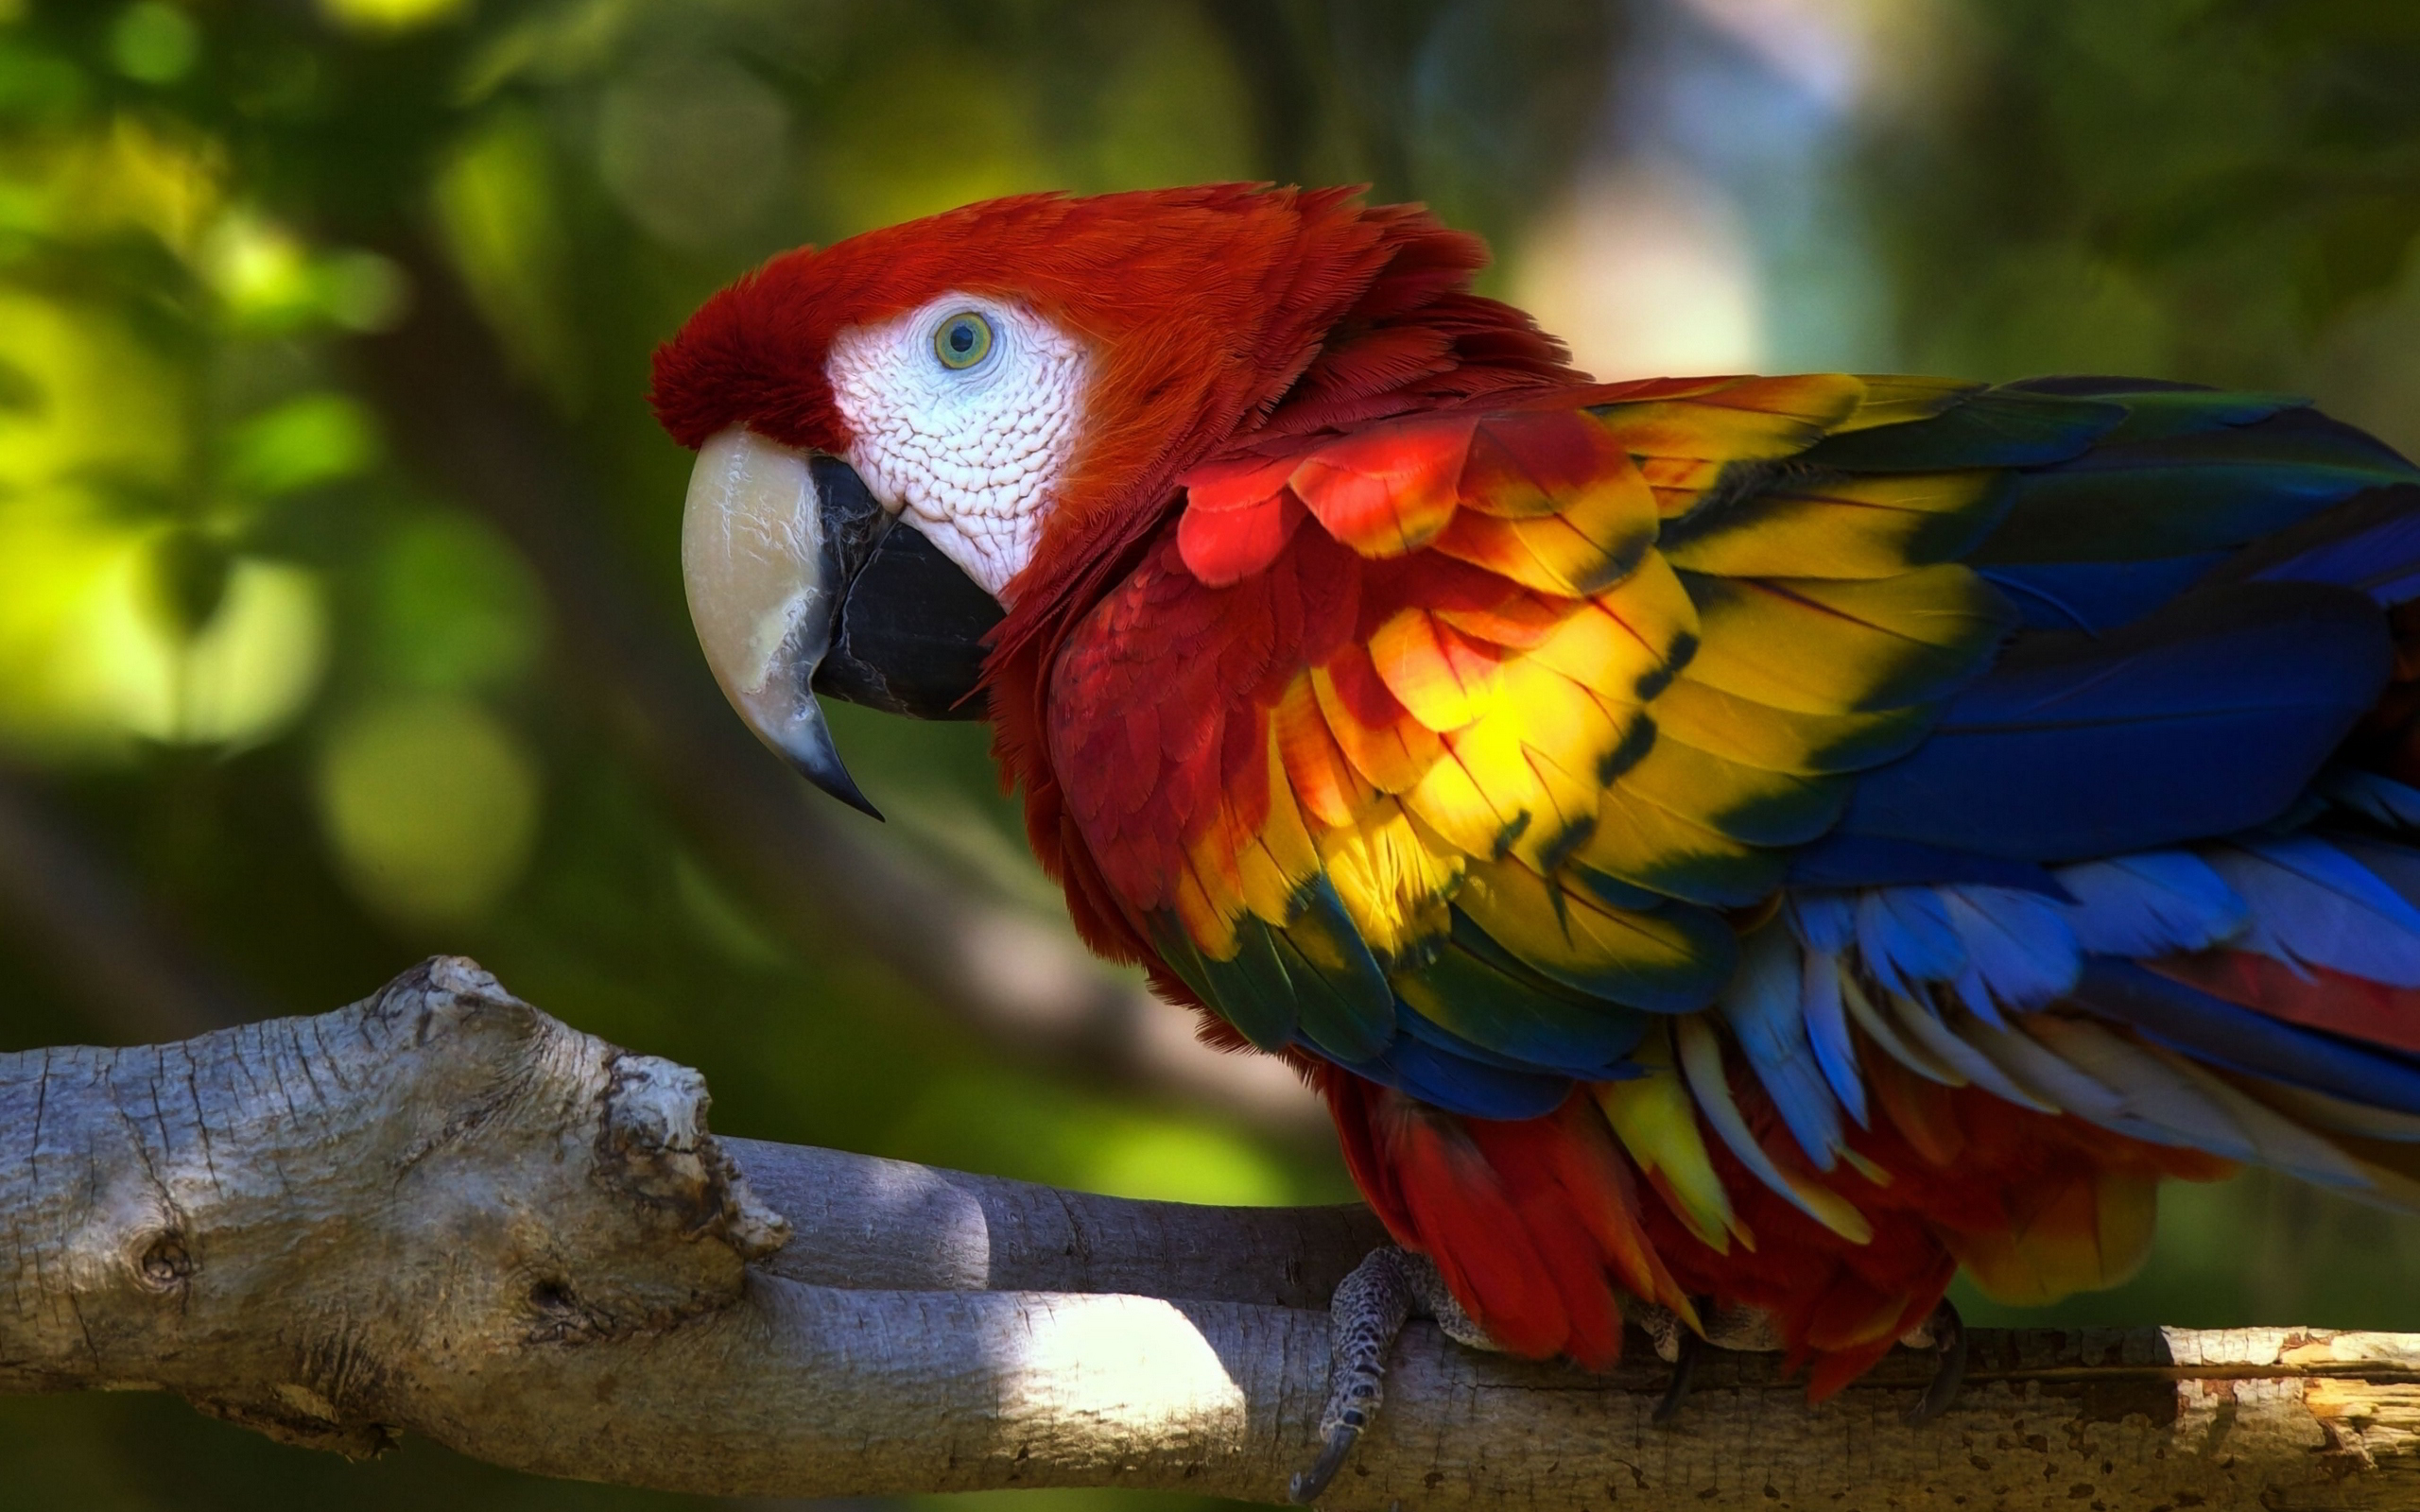 Cute macaw parrot